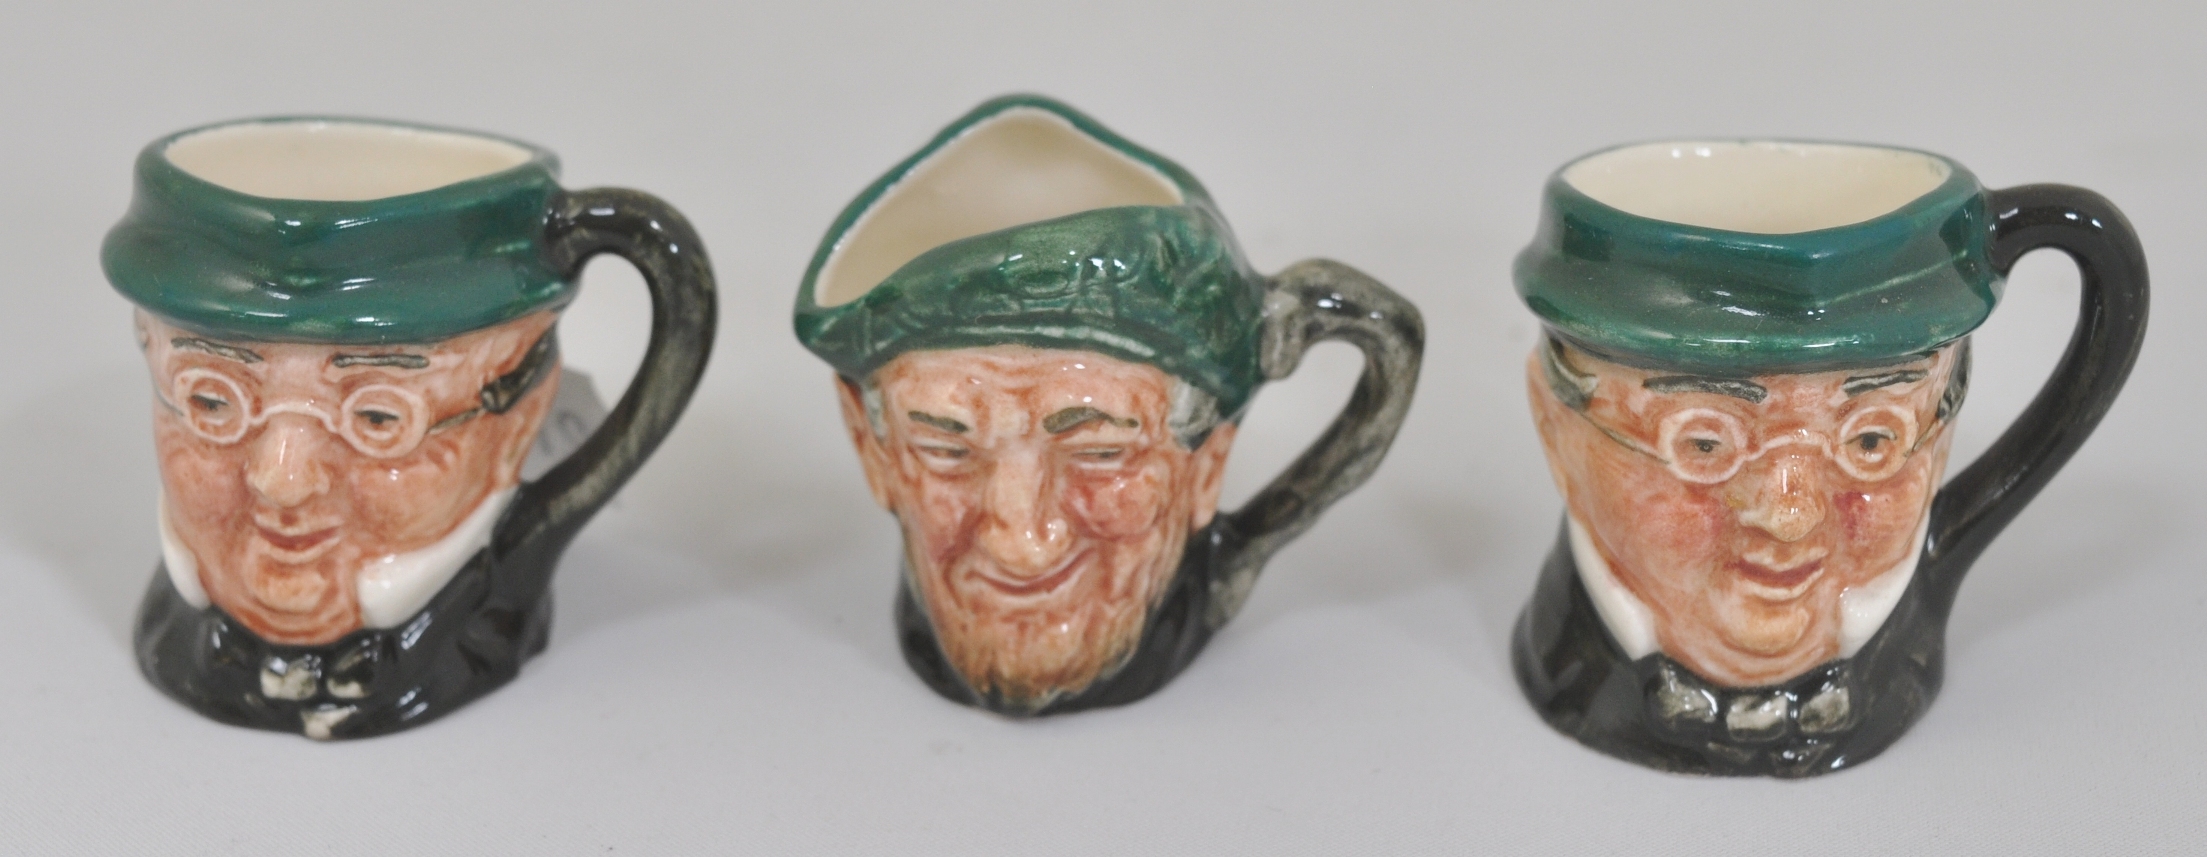 Three miniature Royal Doulton pottery character jugs, height 3.5cms. - Image 3 of 3